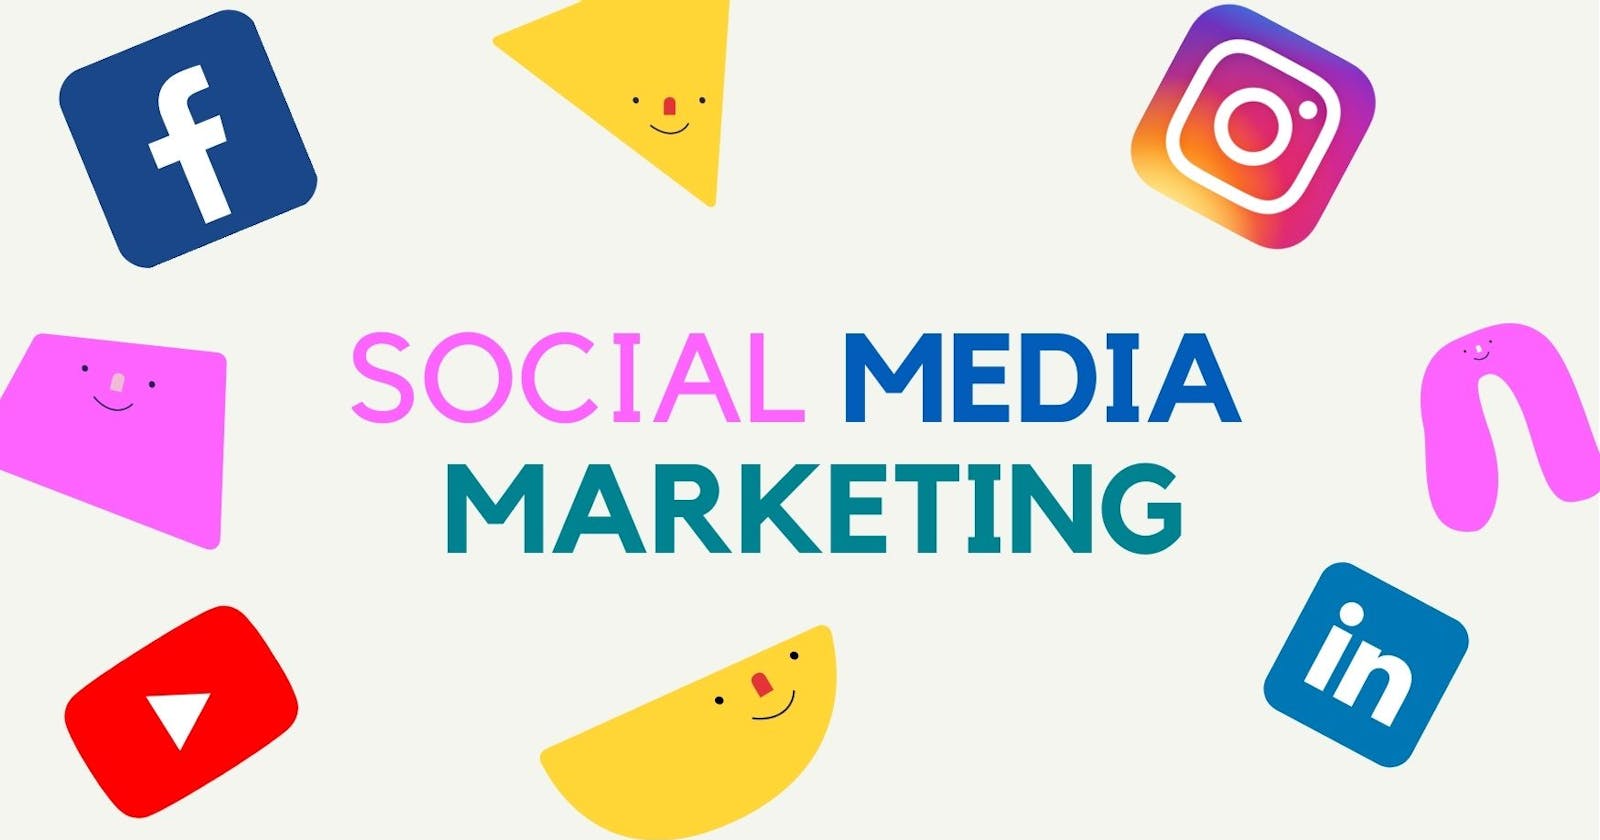 Know About- "SOCIAL MEDIA MARKETING"